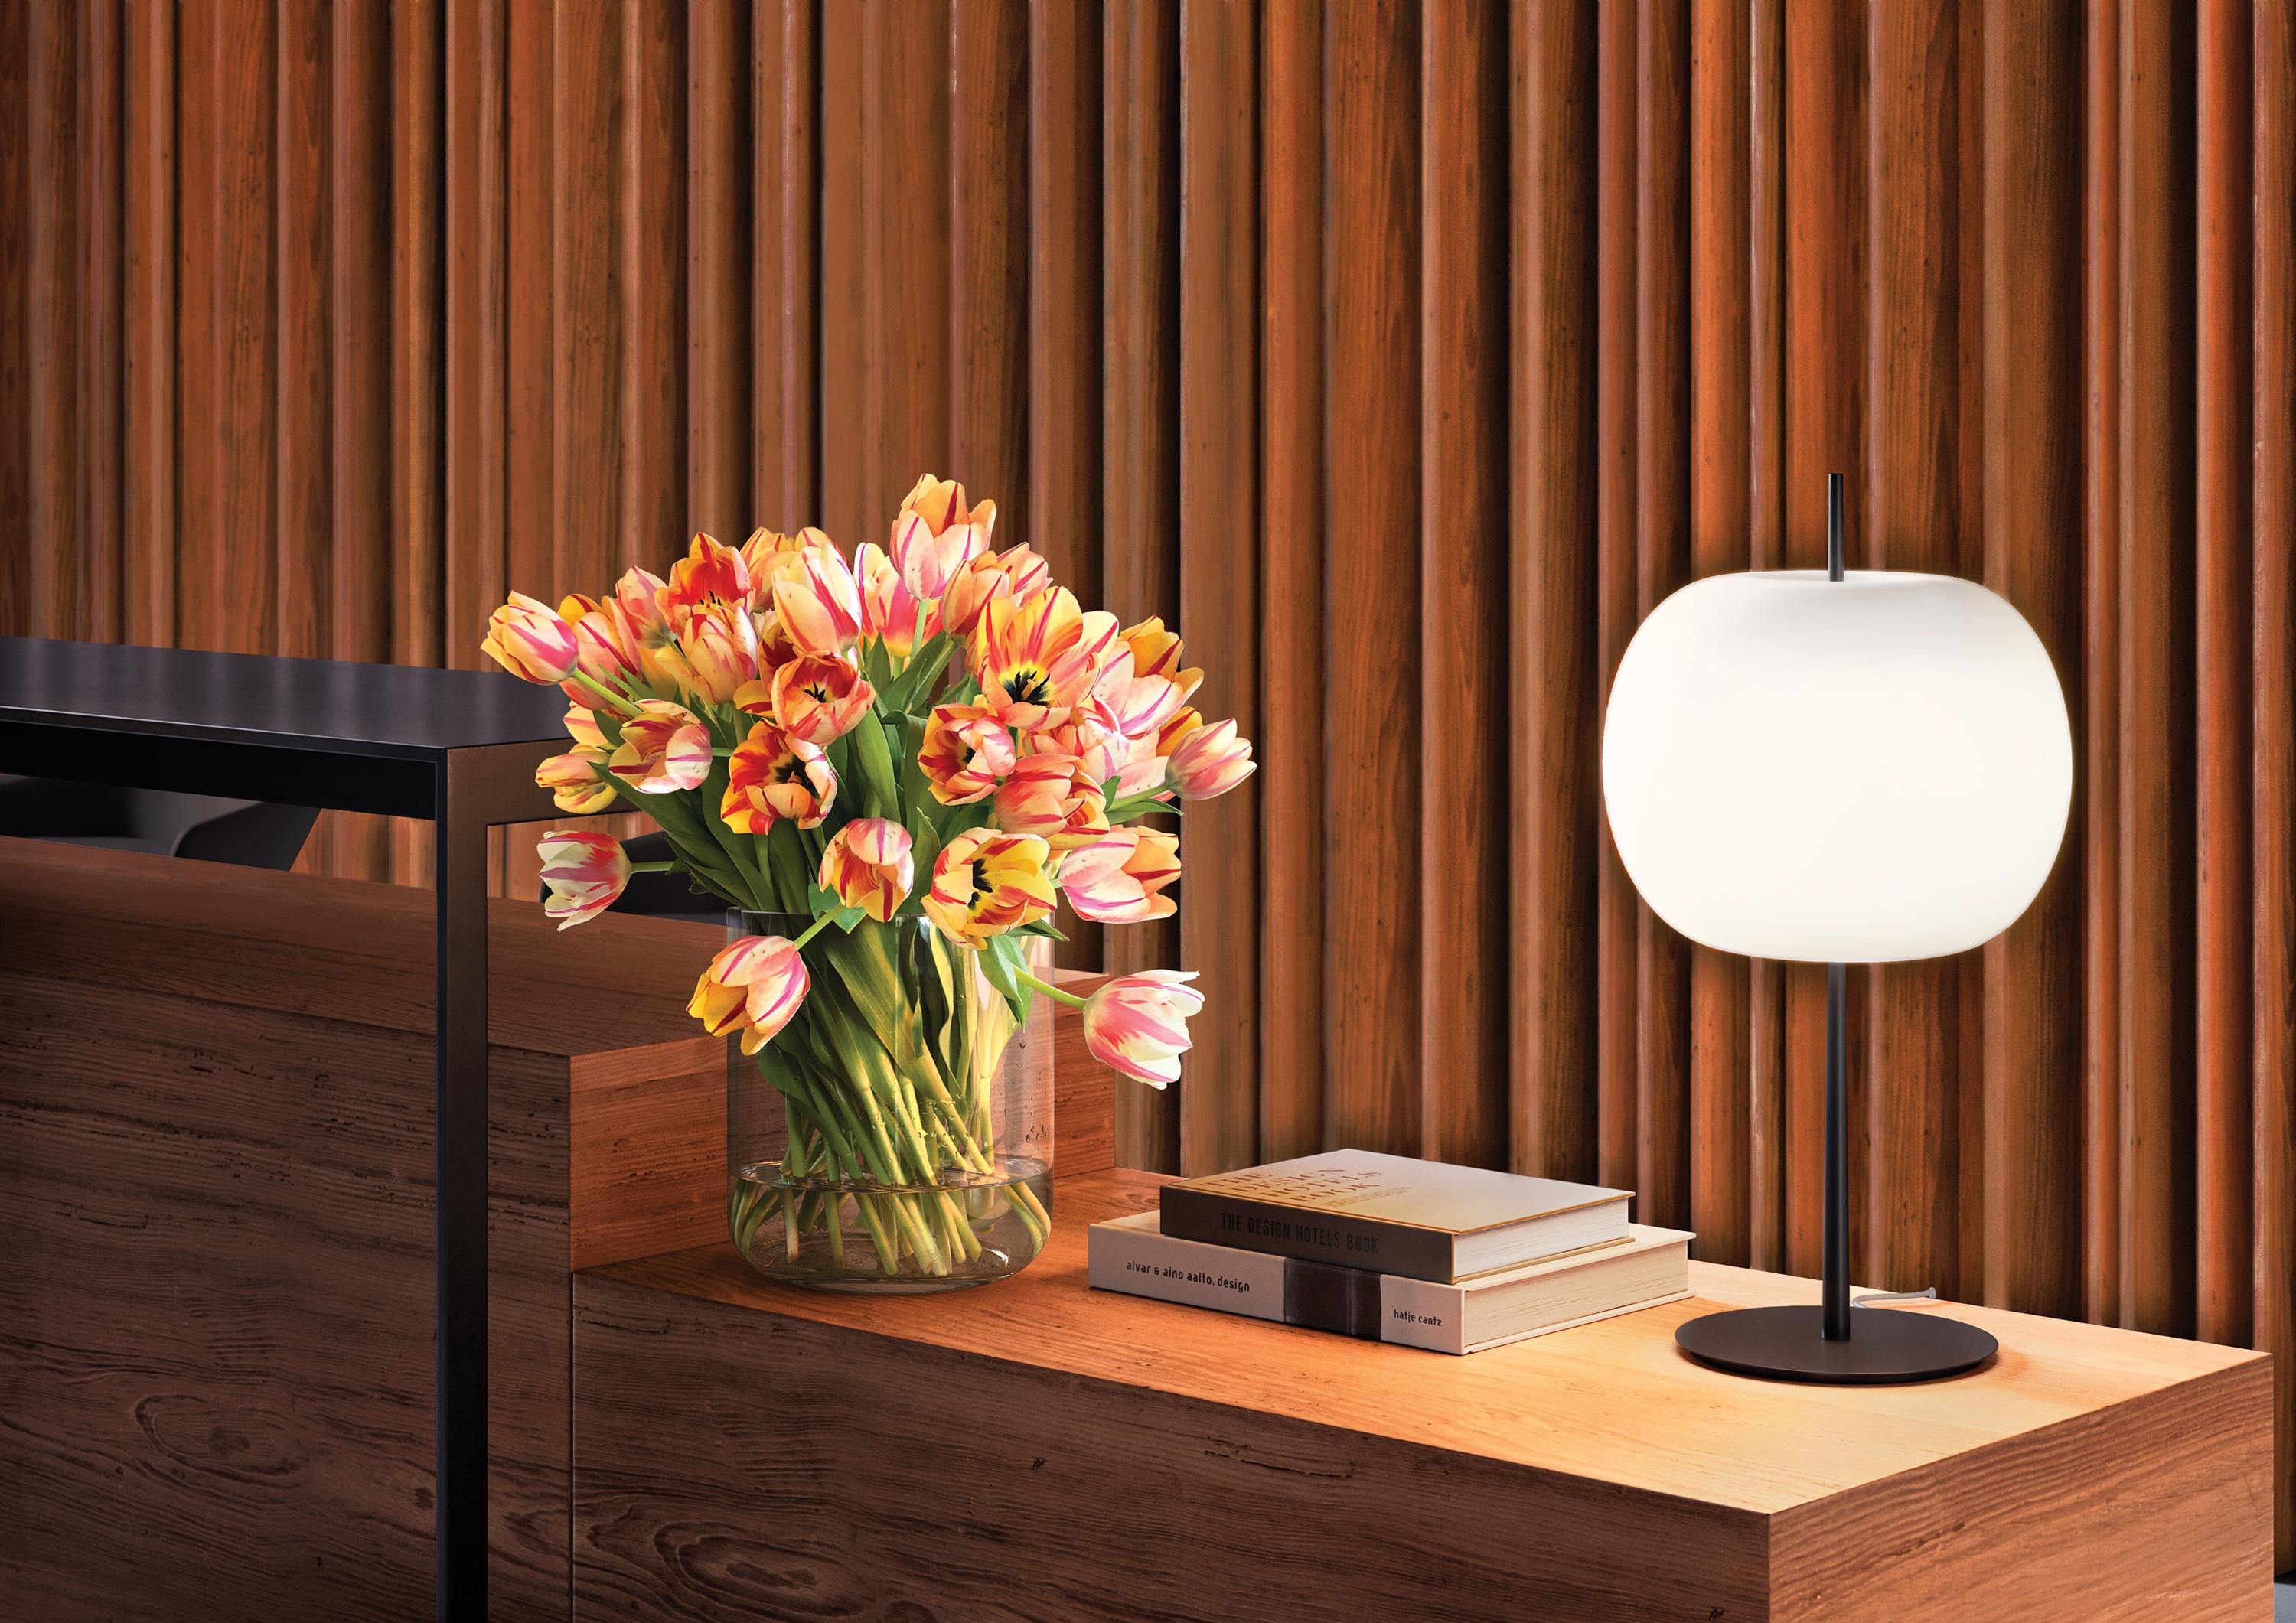 Kushi table XL black finish

A long, metal rod pierces the soft glass diffuser. The evocative intensity of the simplest and purest of shapes for an imposing lamp with a sophisticated and discrete presence. Dimmable table lamp. Opal diffuser made